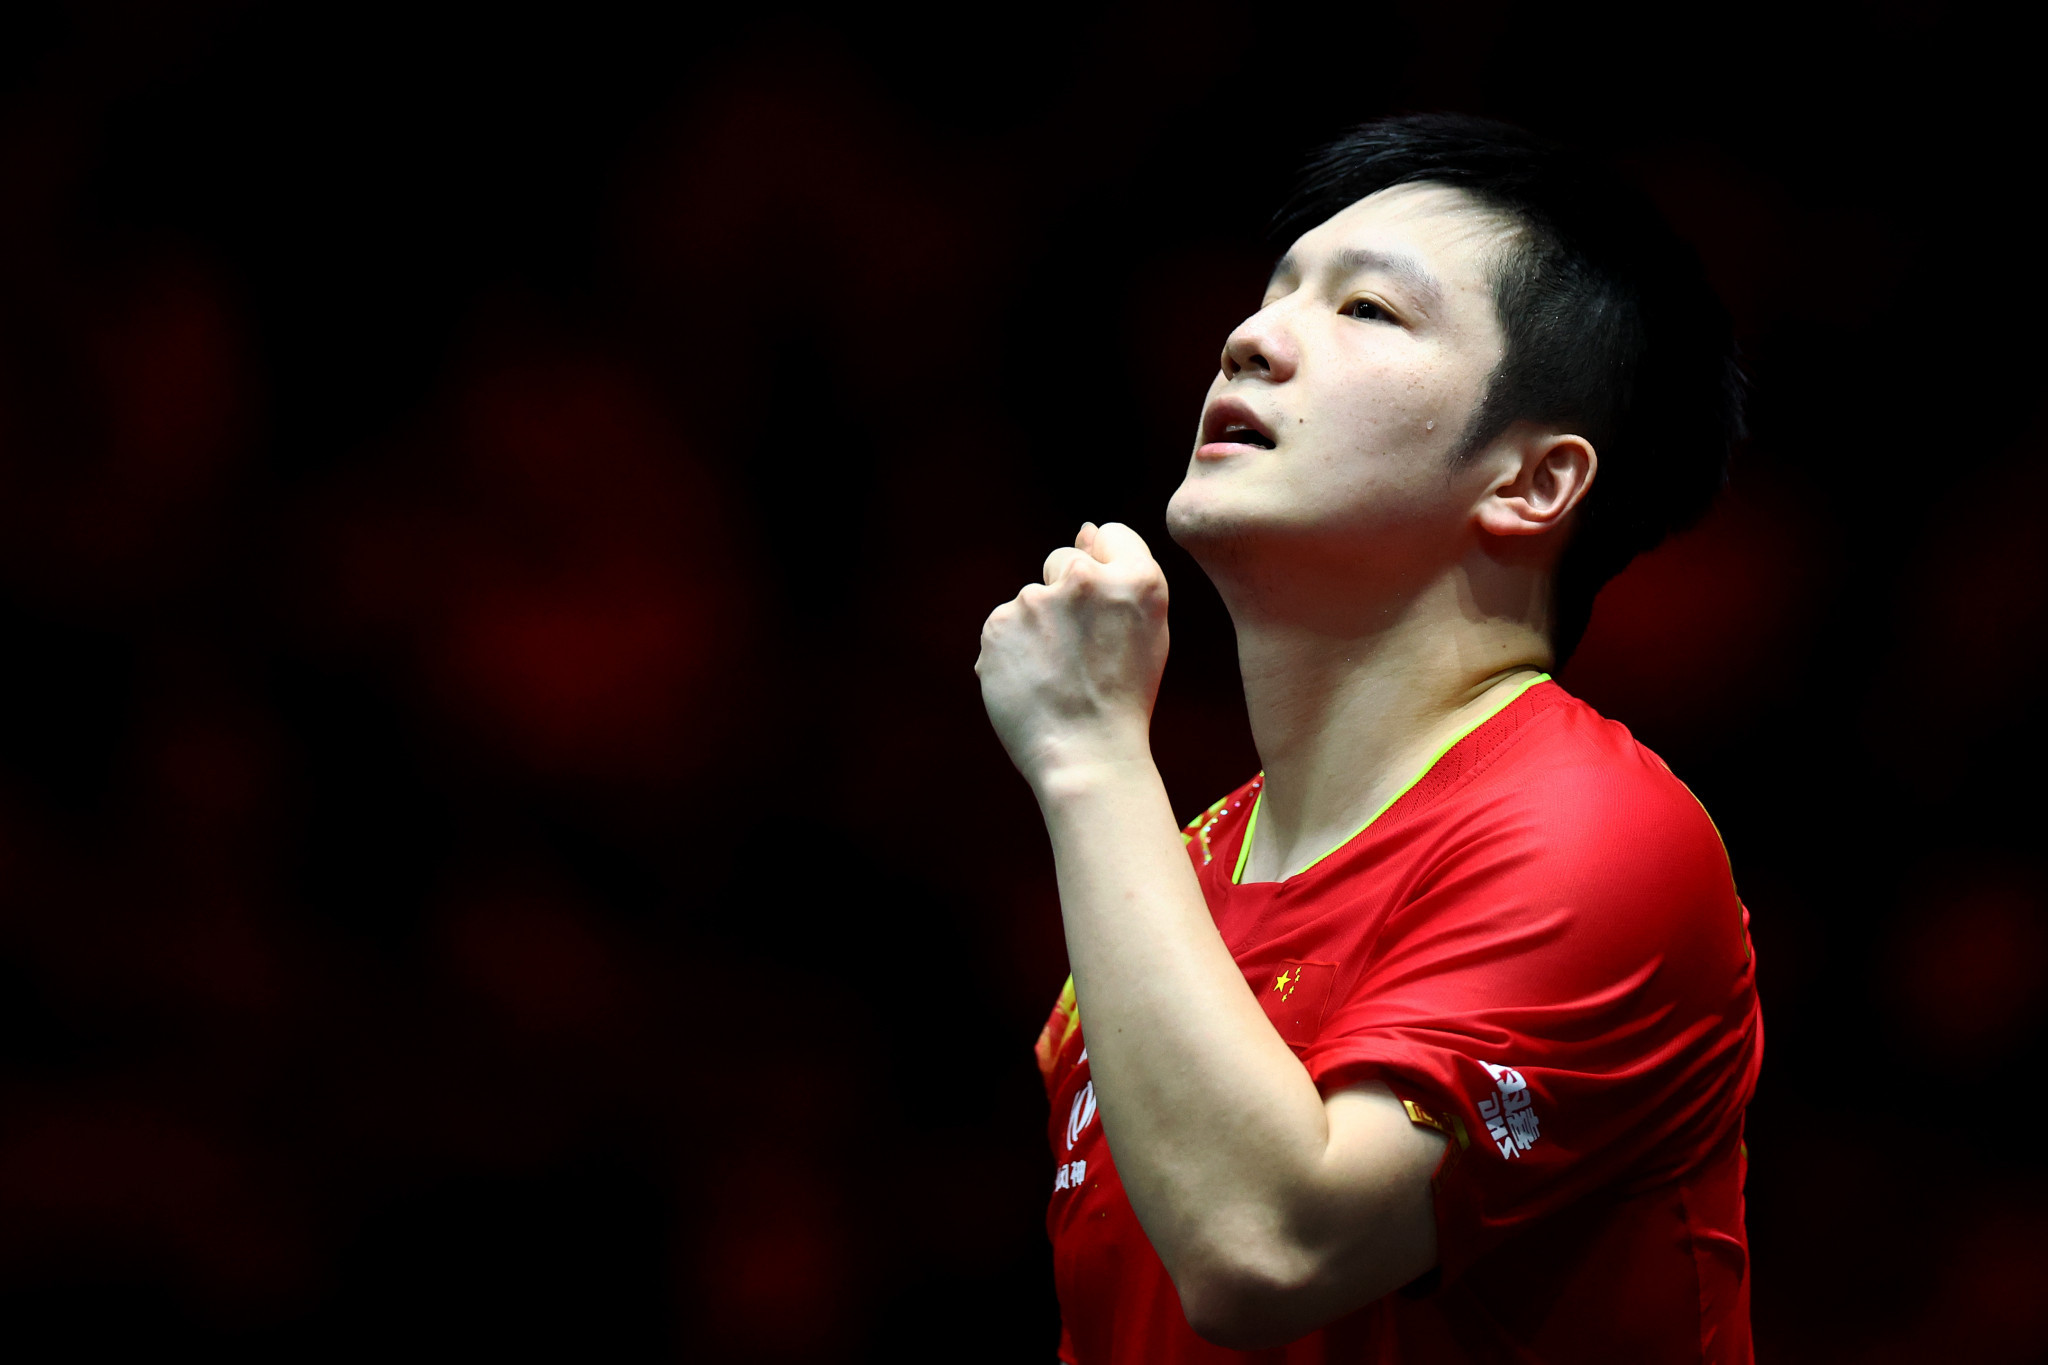 Fan Zhendong is due to play Wang Chuqin in the final of the men's tournament ©Getty Images